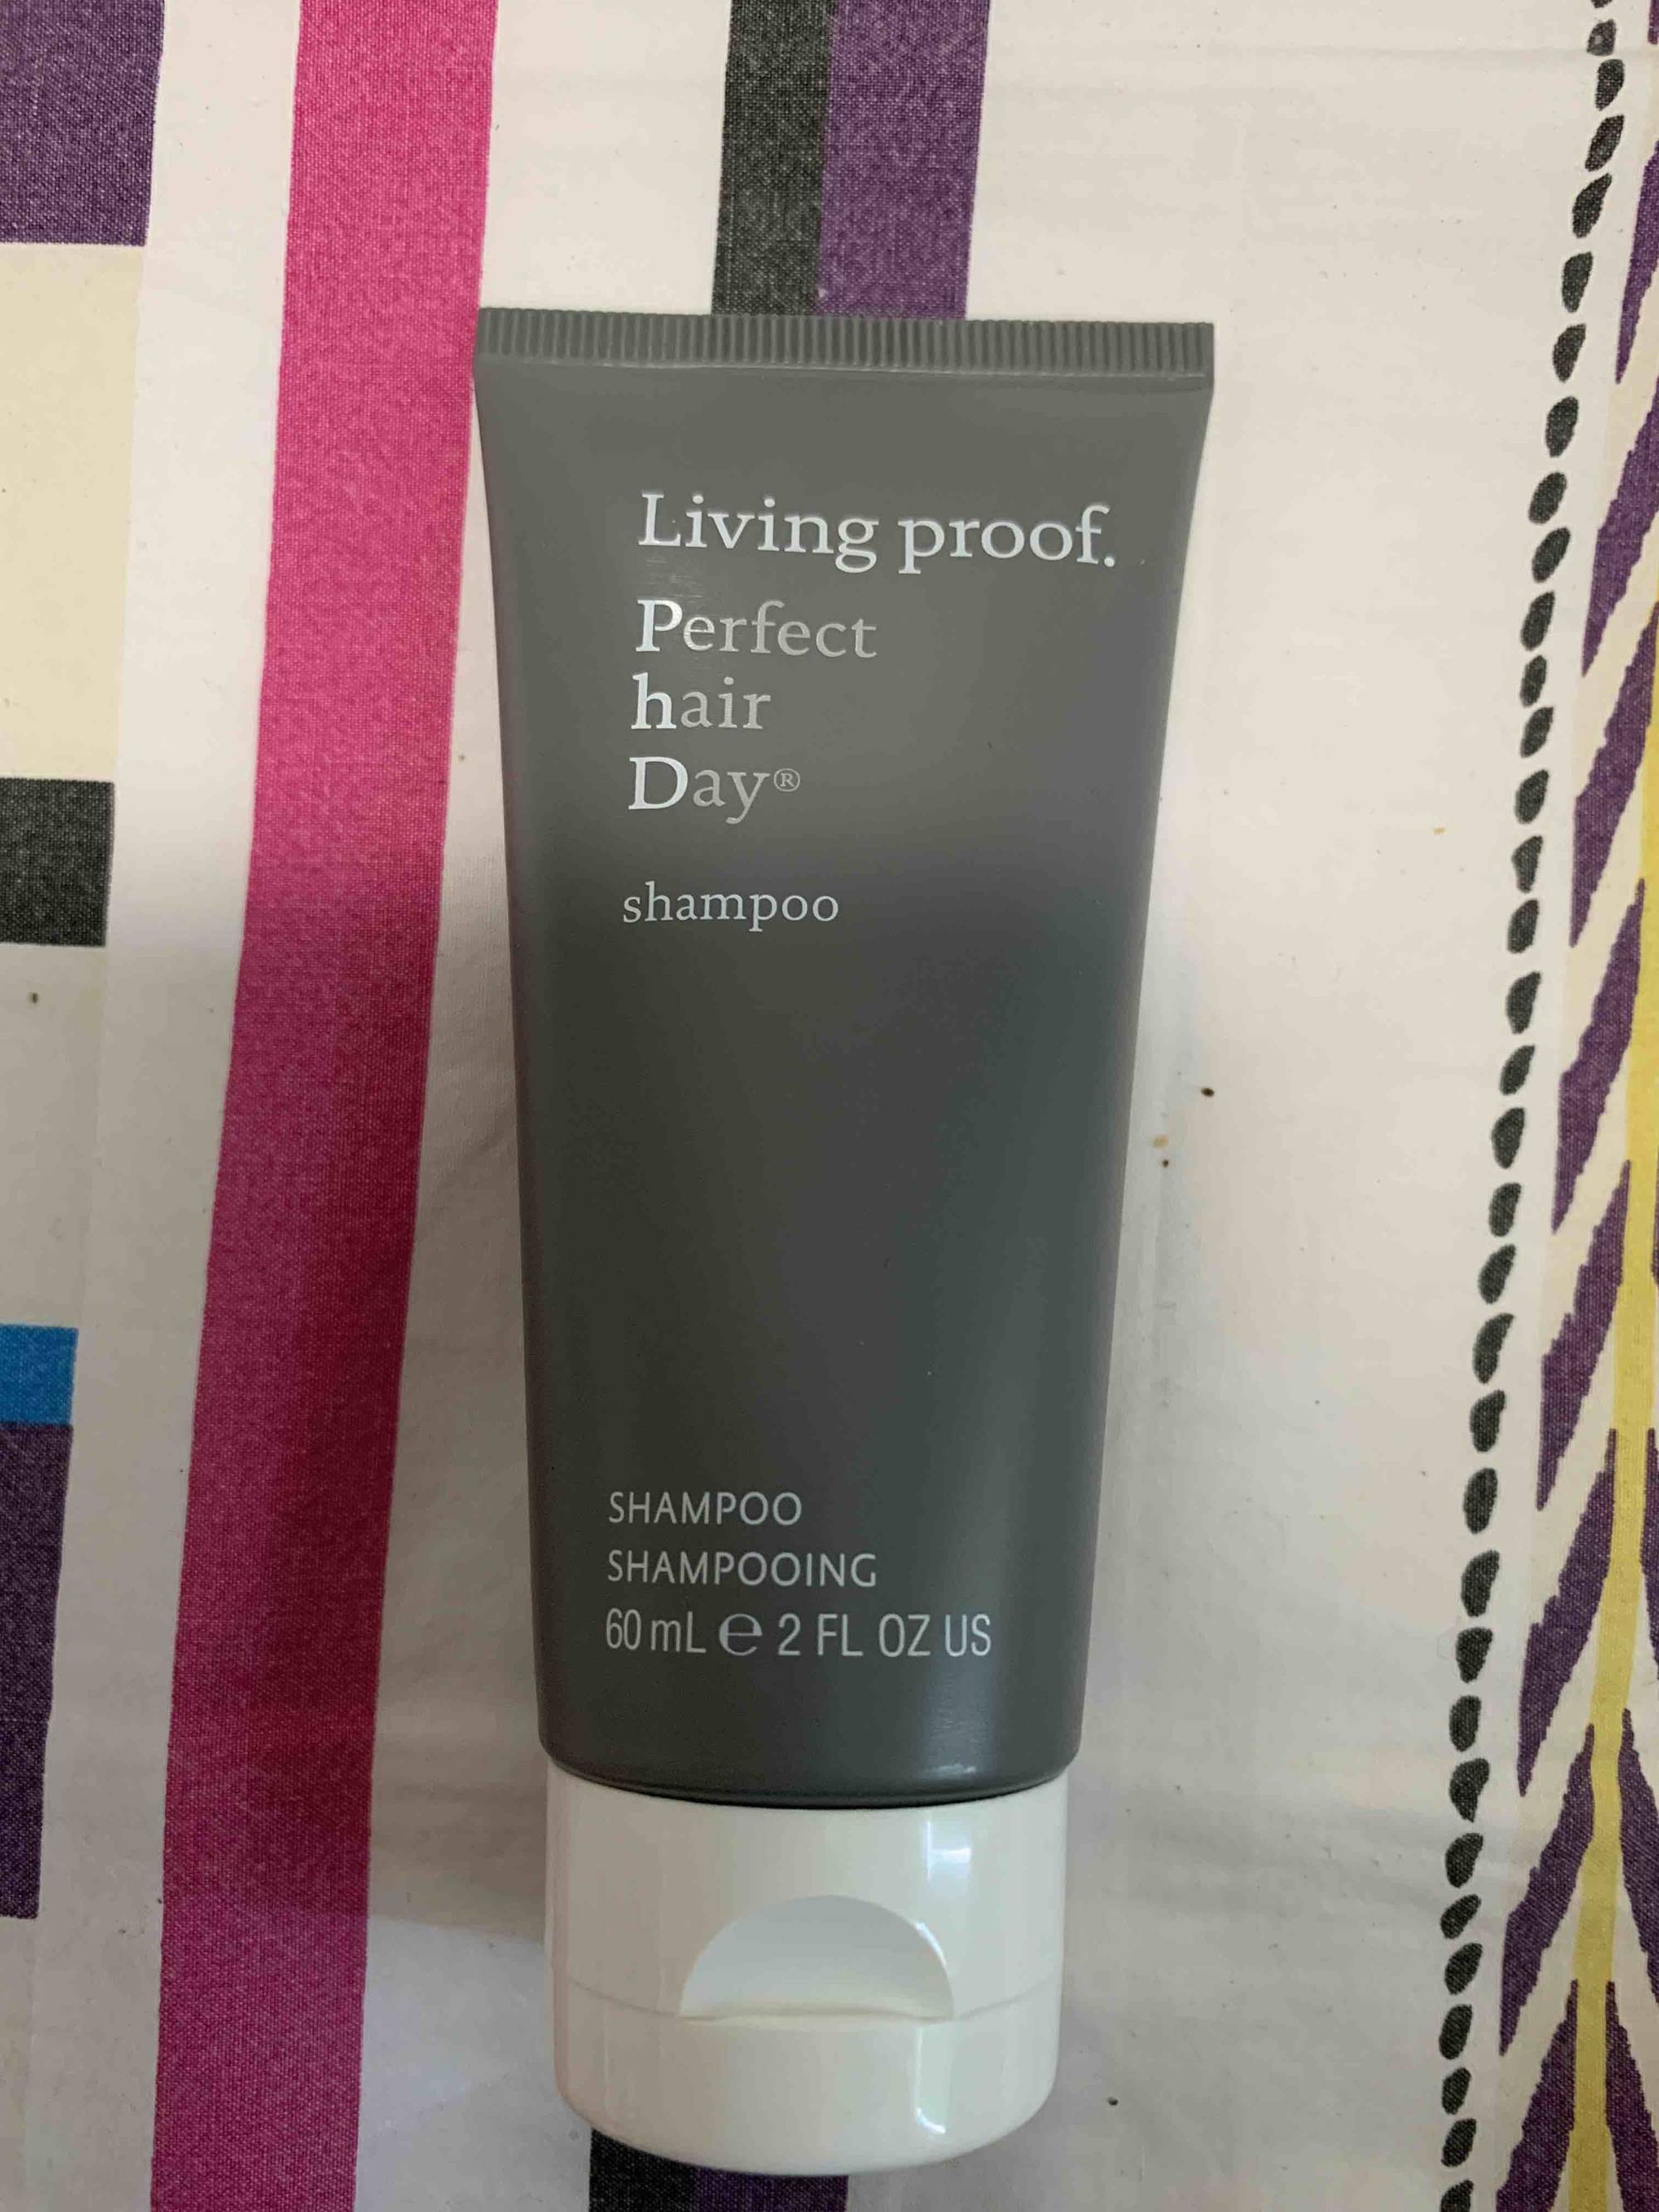 LIVING PROOF - Perfect hair day - Shampooing